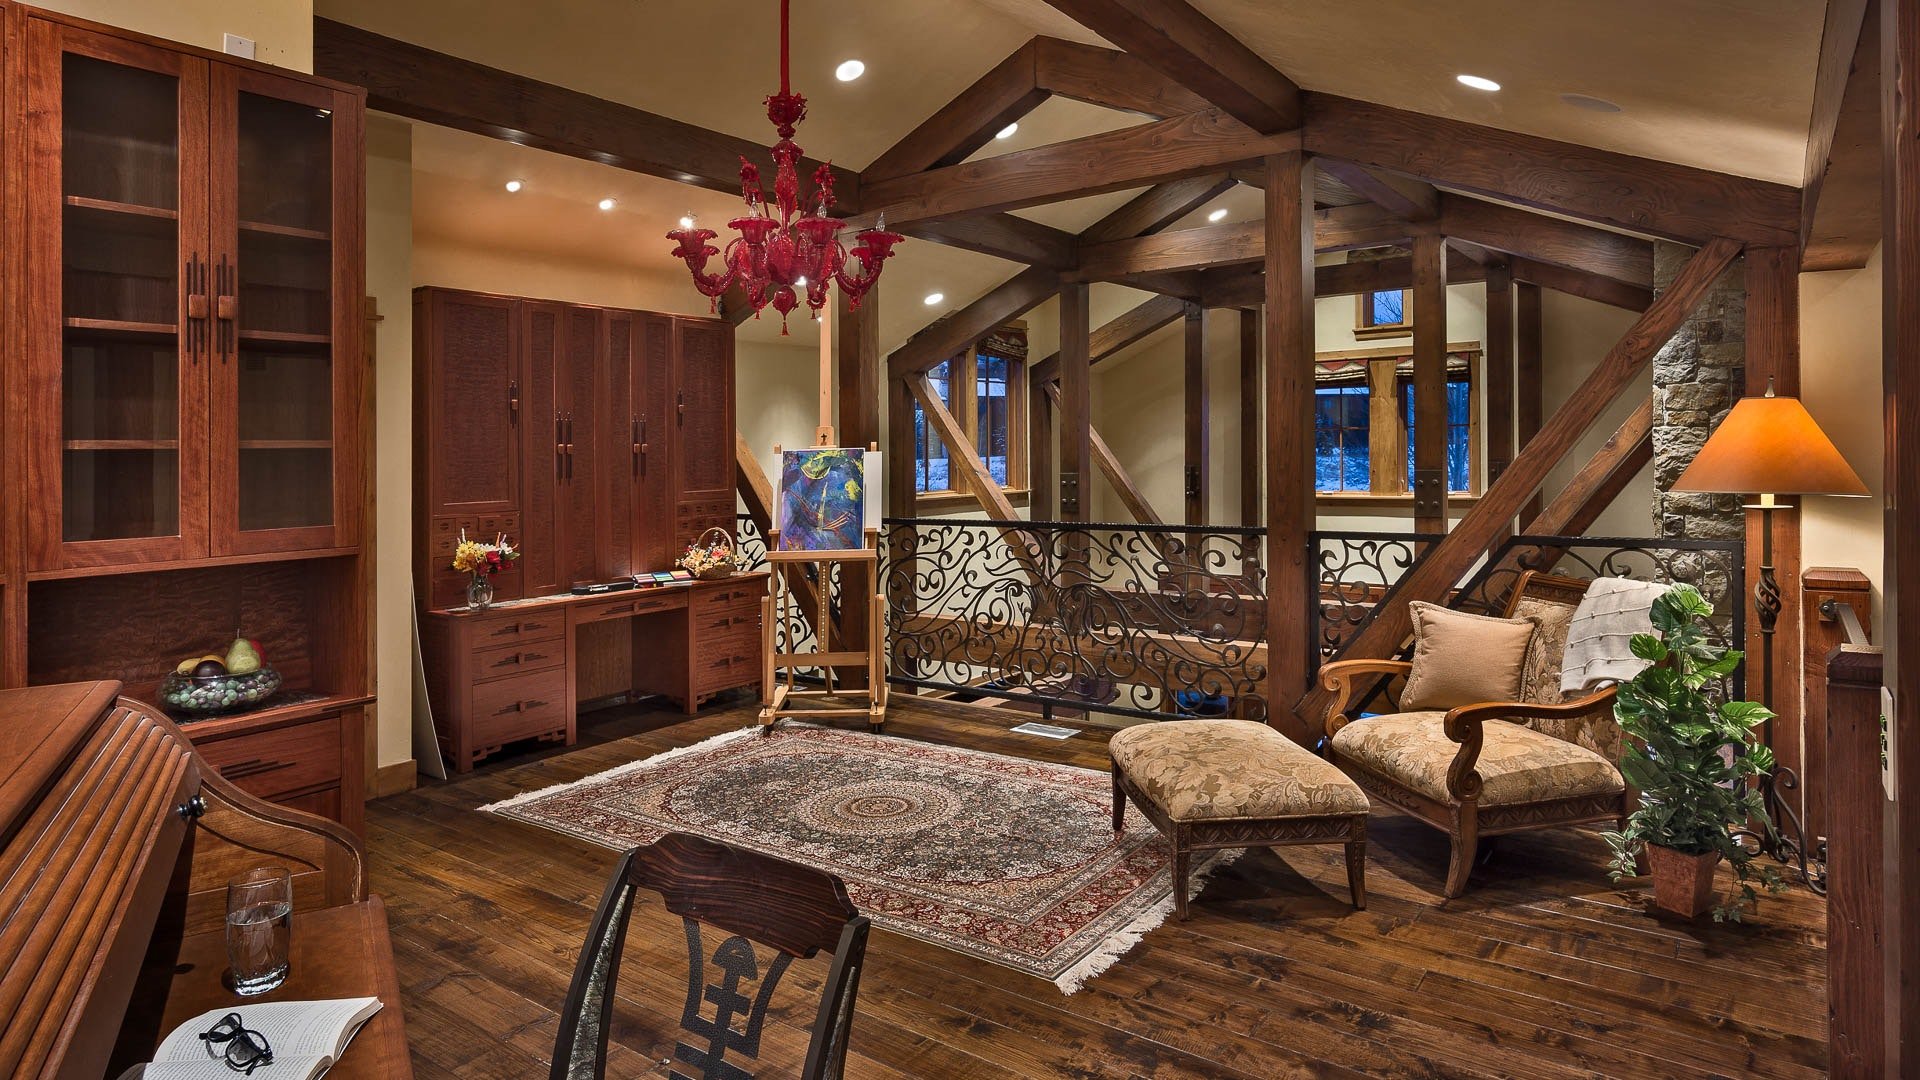 The Rocking Chair | Luxury Vacation Rental in Steamboat Springs, USA